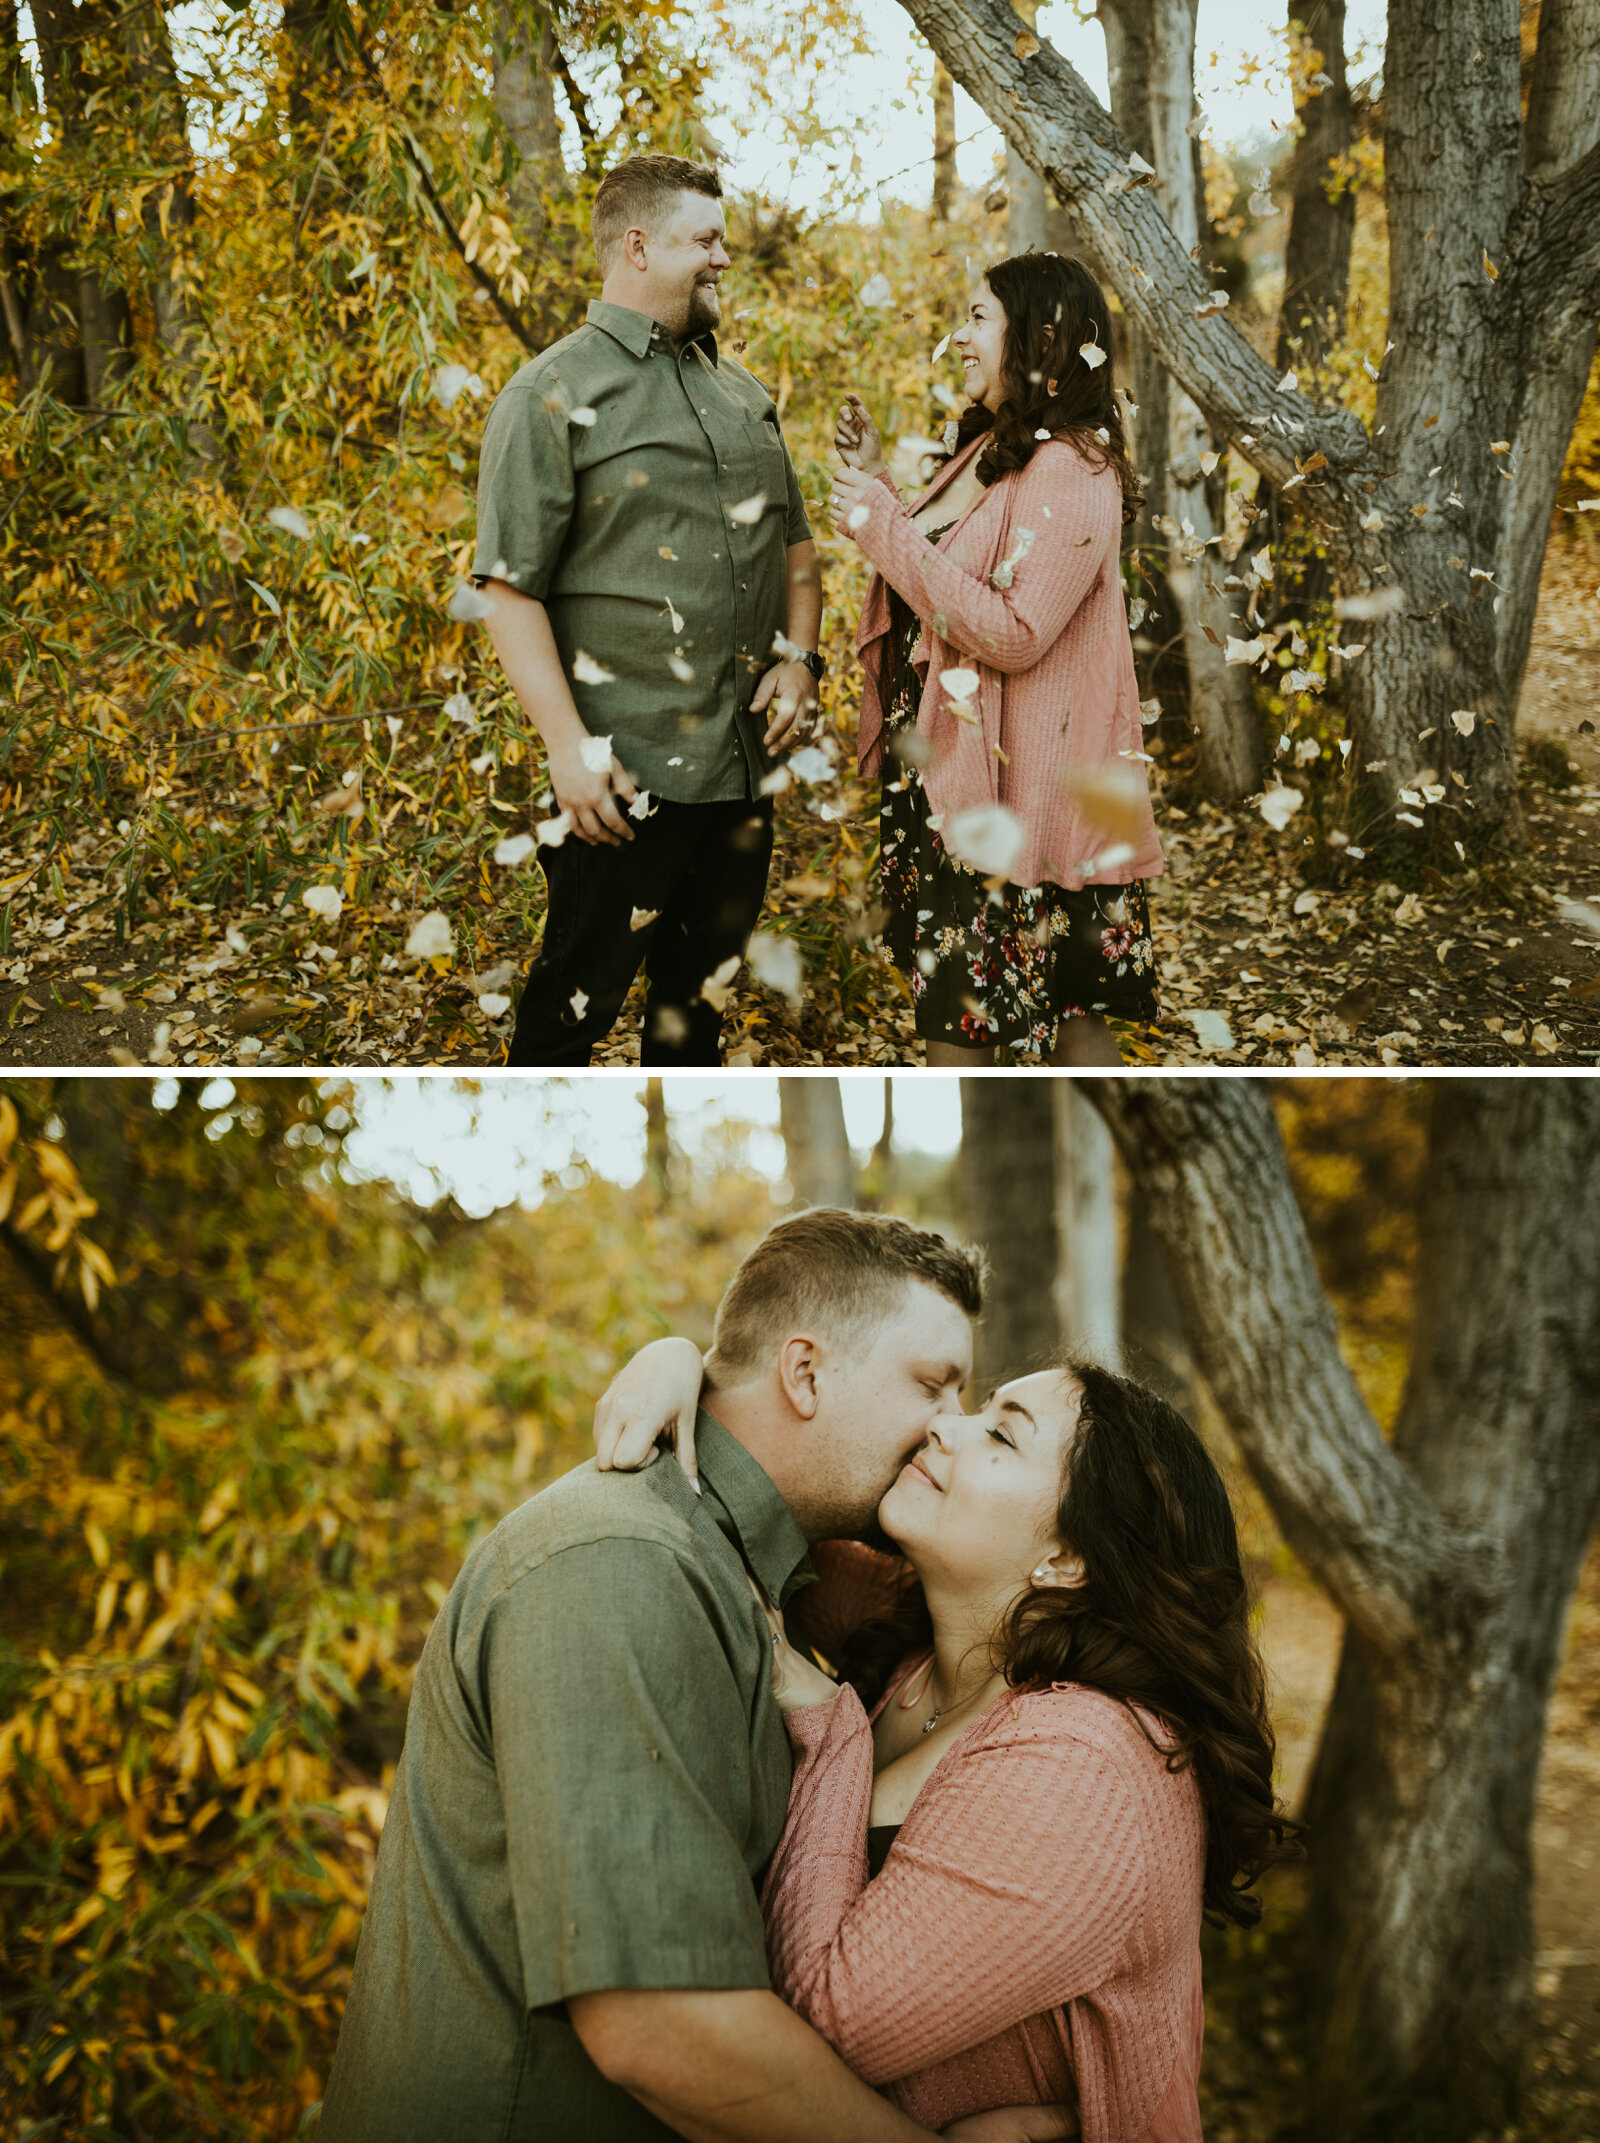 prescott valley engagement photos fain park fall colors fall outfit inspiration for engagement photos comfy clothing ideas for photoshoots.jpg